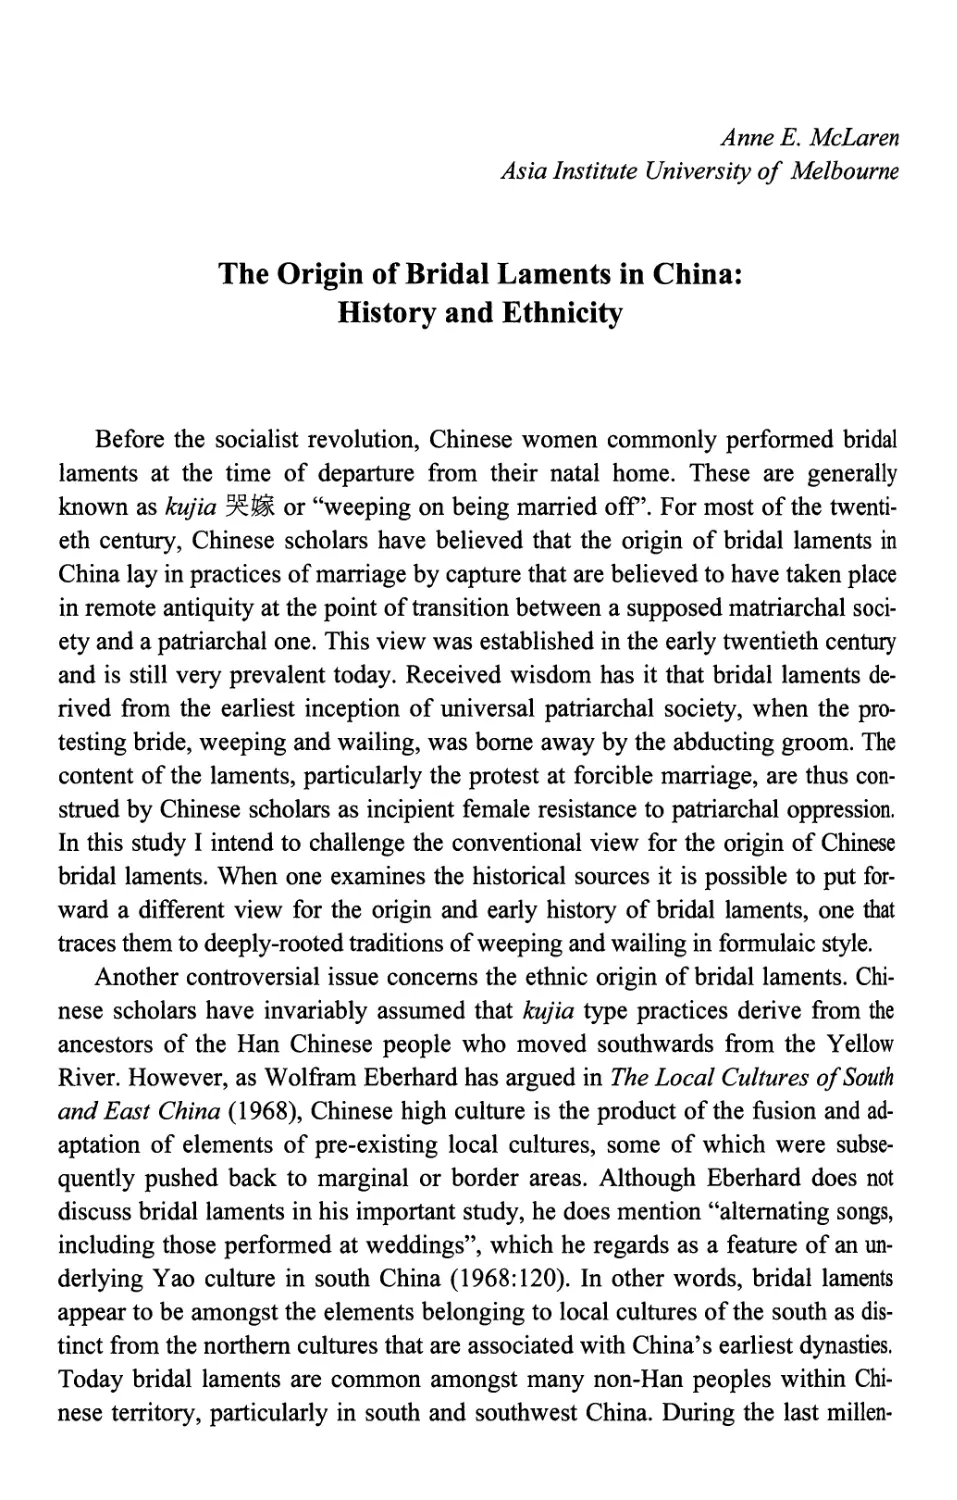 Anne E. McLaren. The Origin of Bridal Laments in China: History and Ethnicity